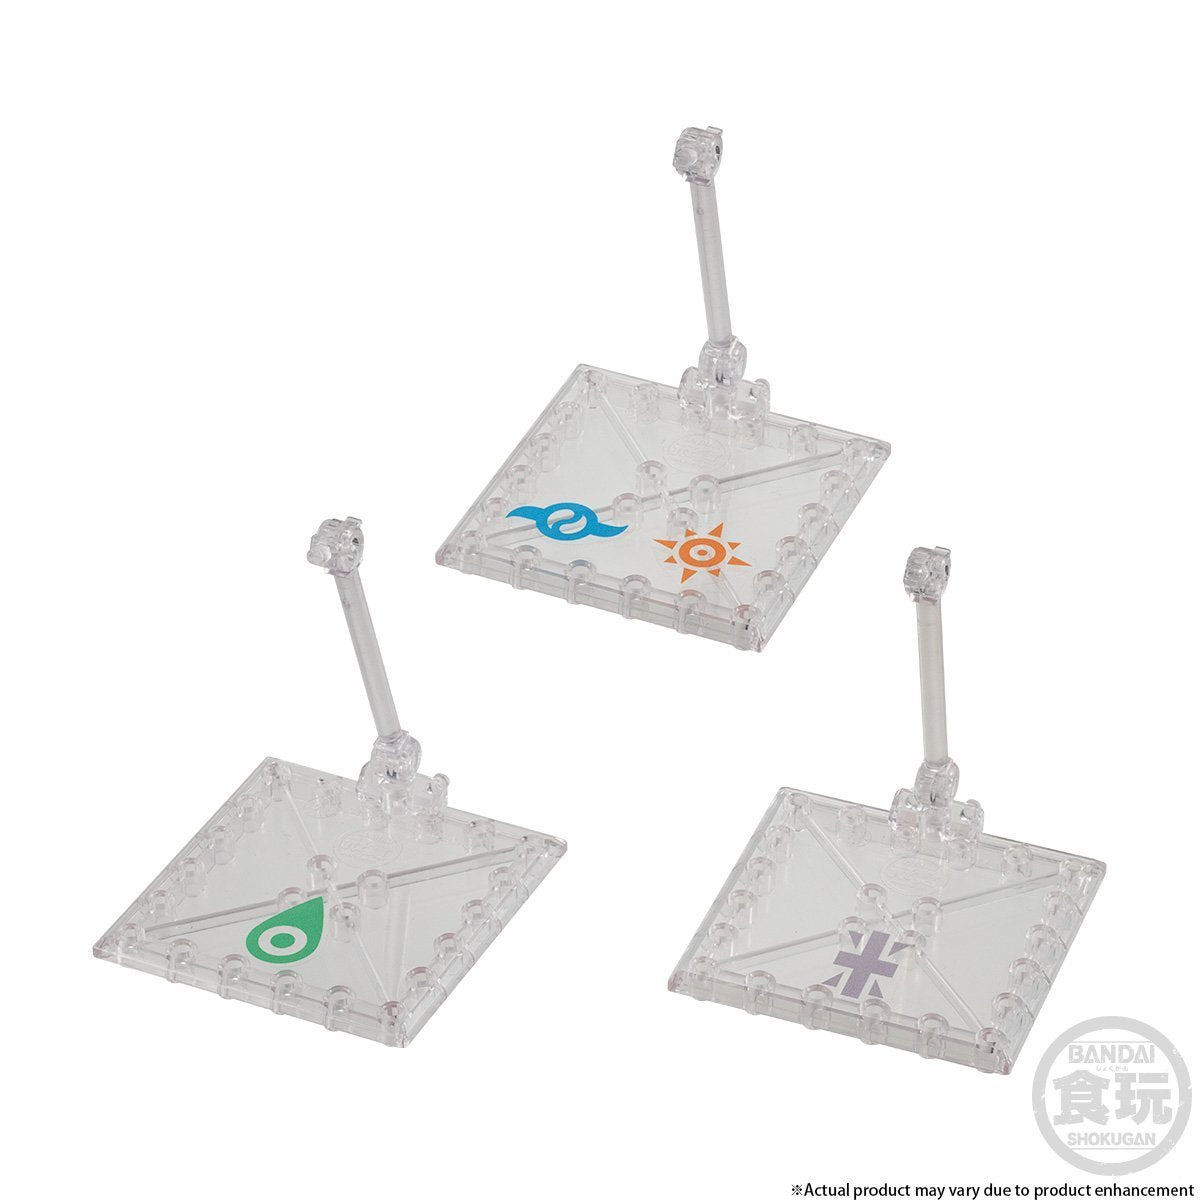 Digimon Shodo Ver. 3 (Completed Set of 3) (P-Bandai Limited)-Bandai-Ace Cards &amp; Collectibles